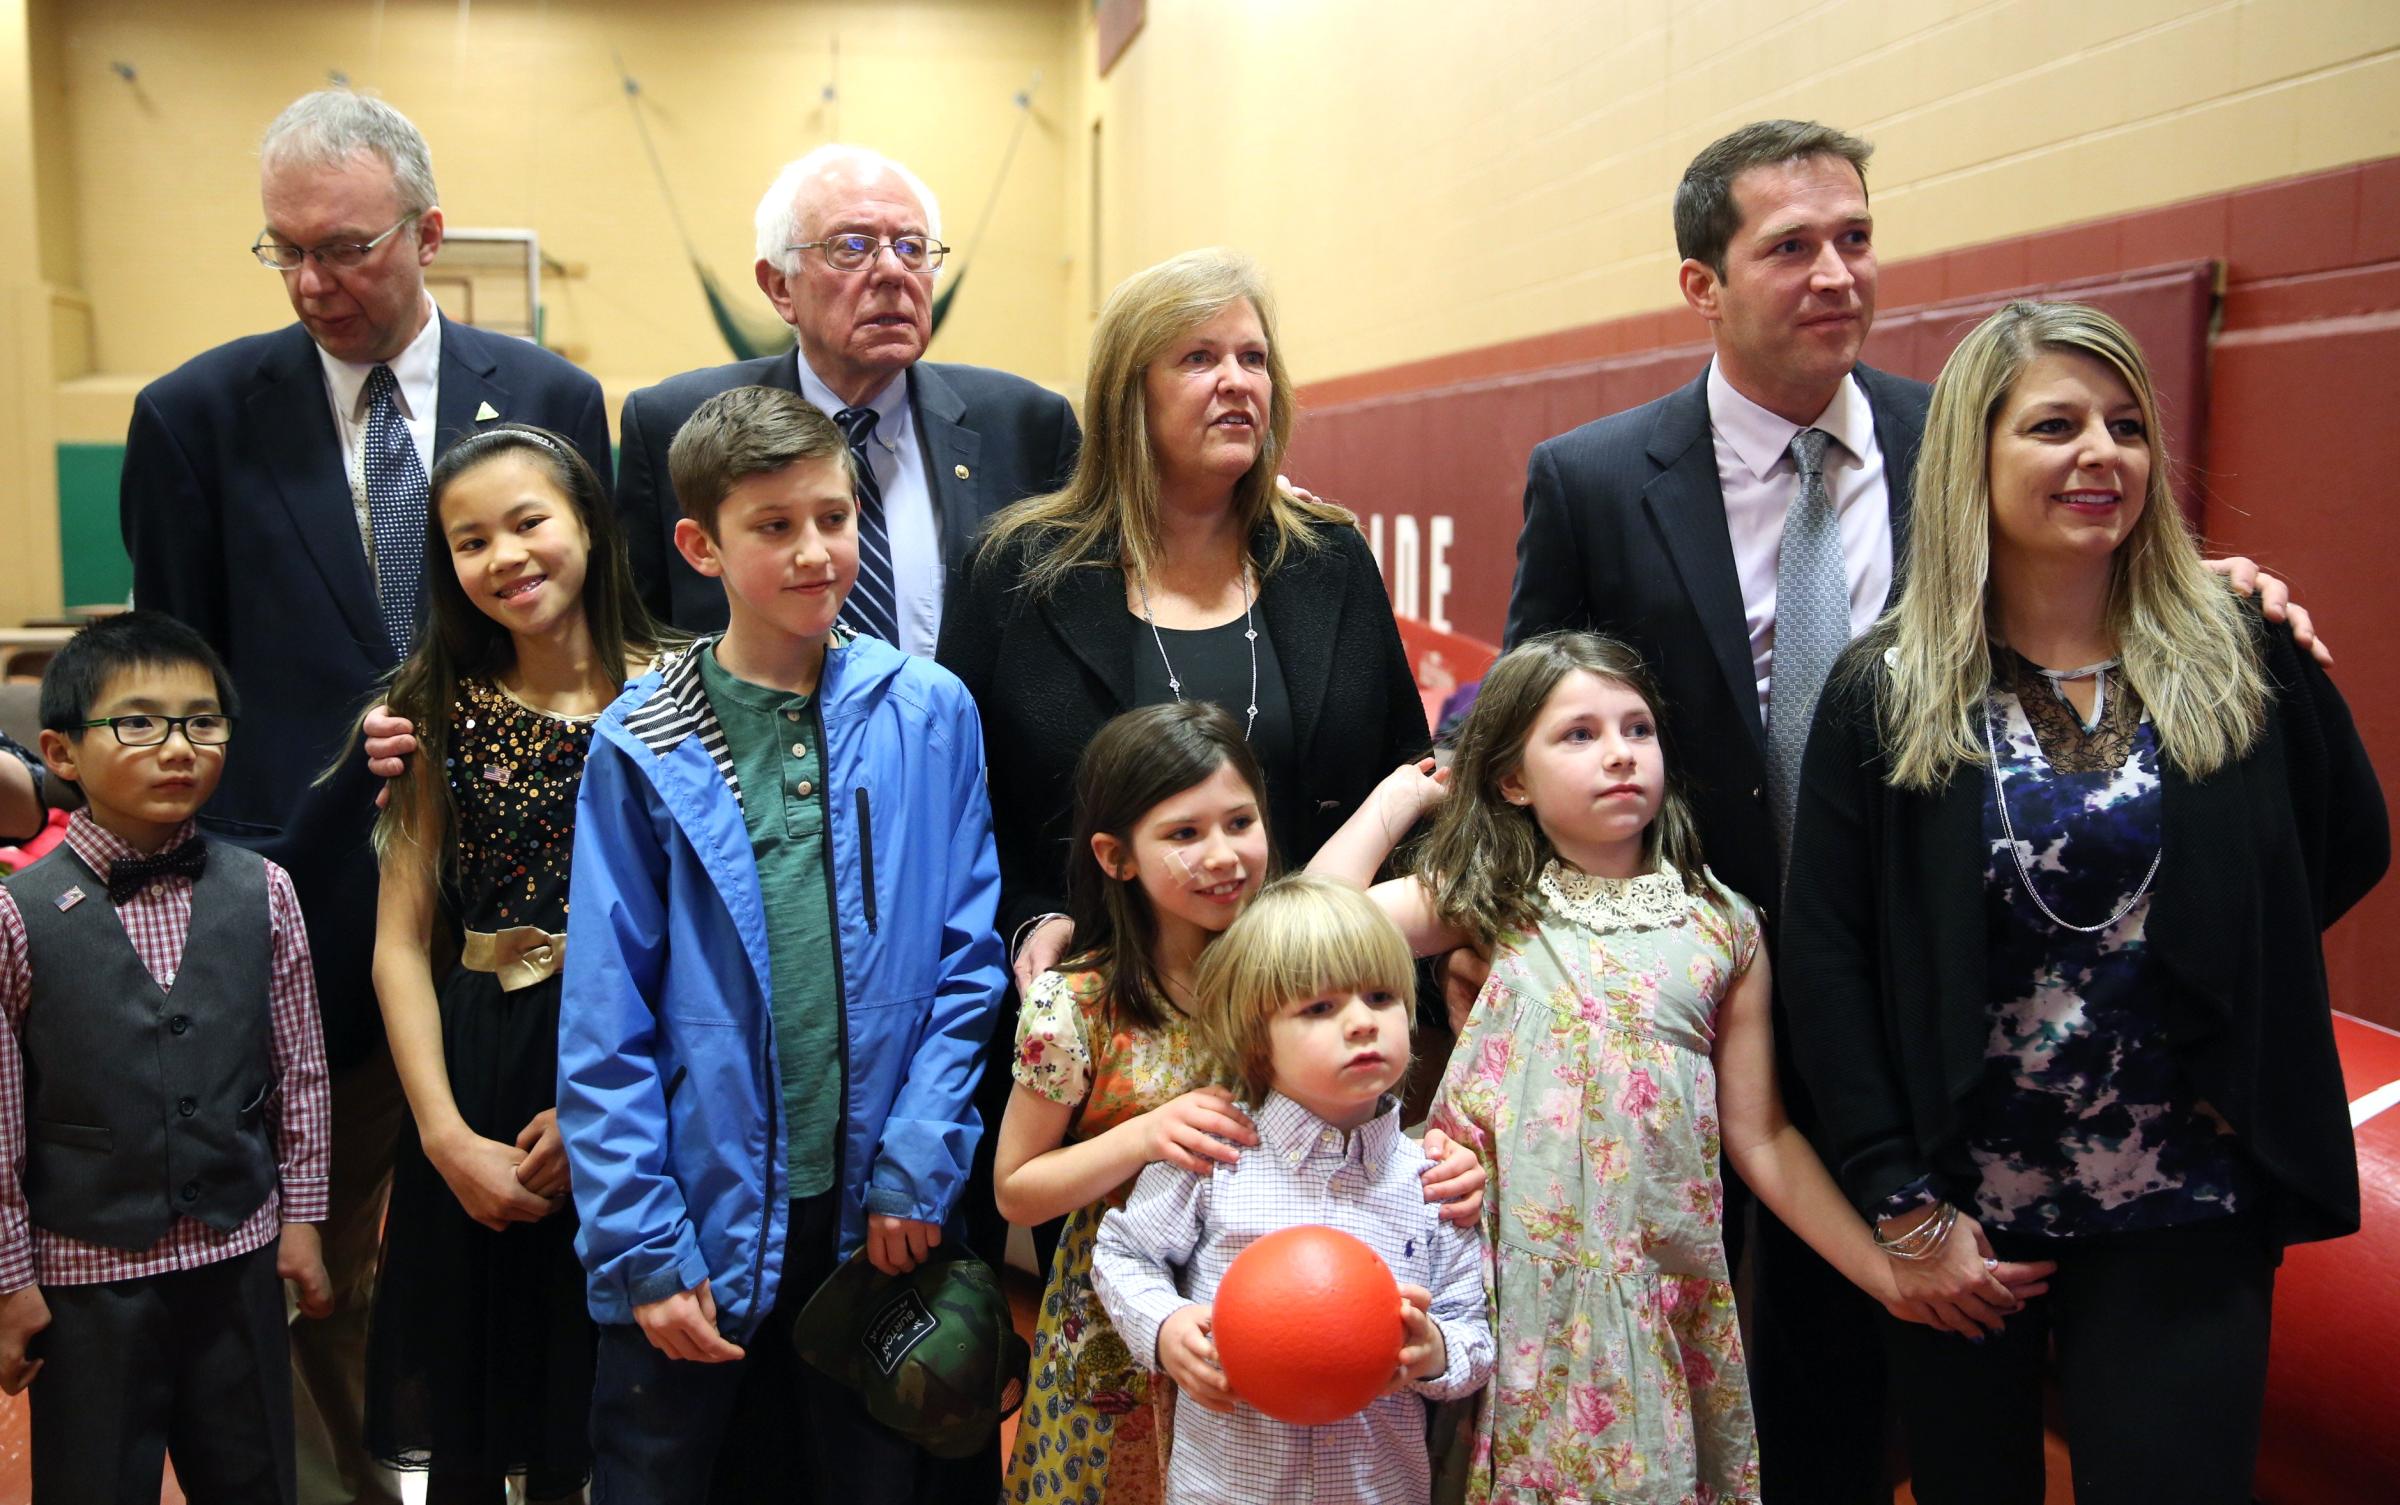 Vermont Sen. Bernie Sanders watches primary returns with his family on election night in Concord, N.H.,on Feb. 9, 2016.